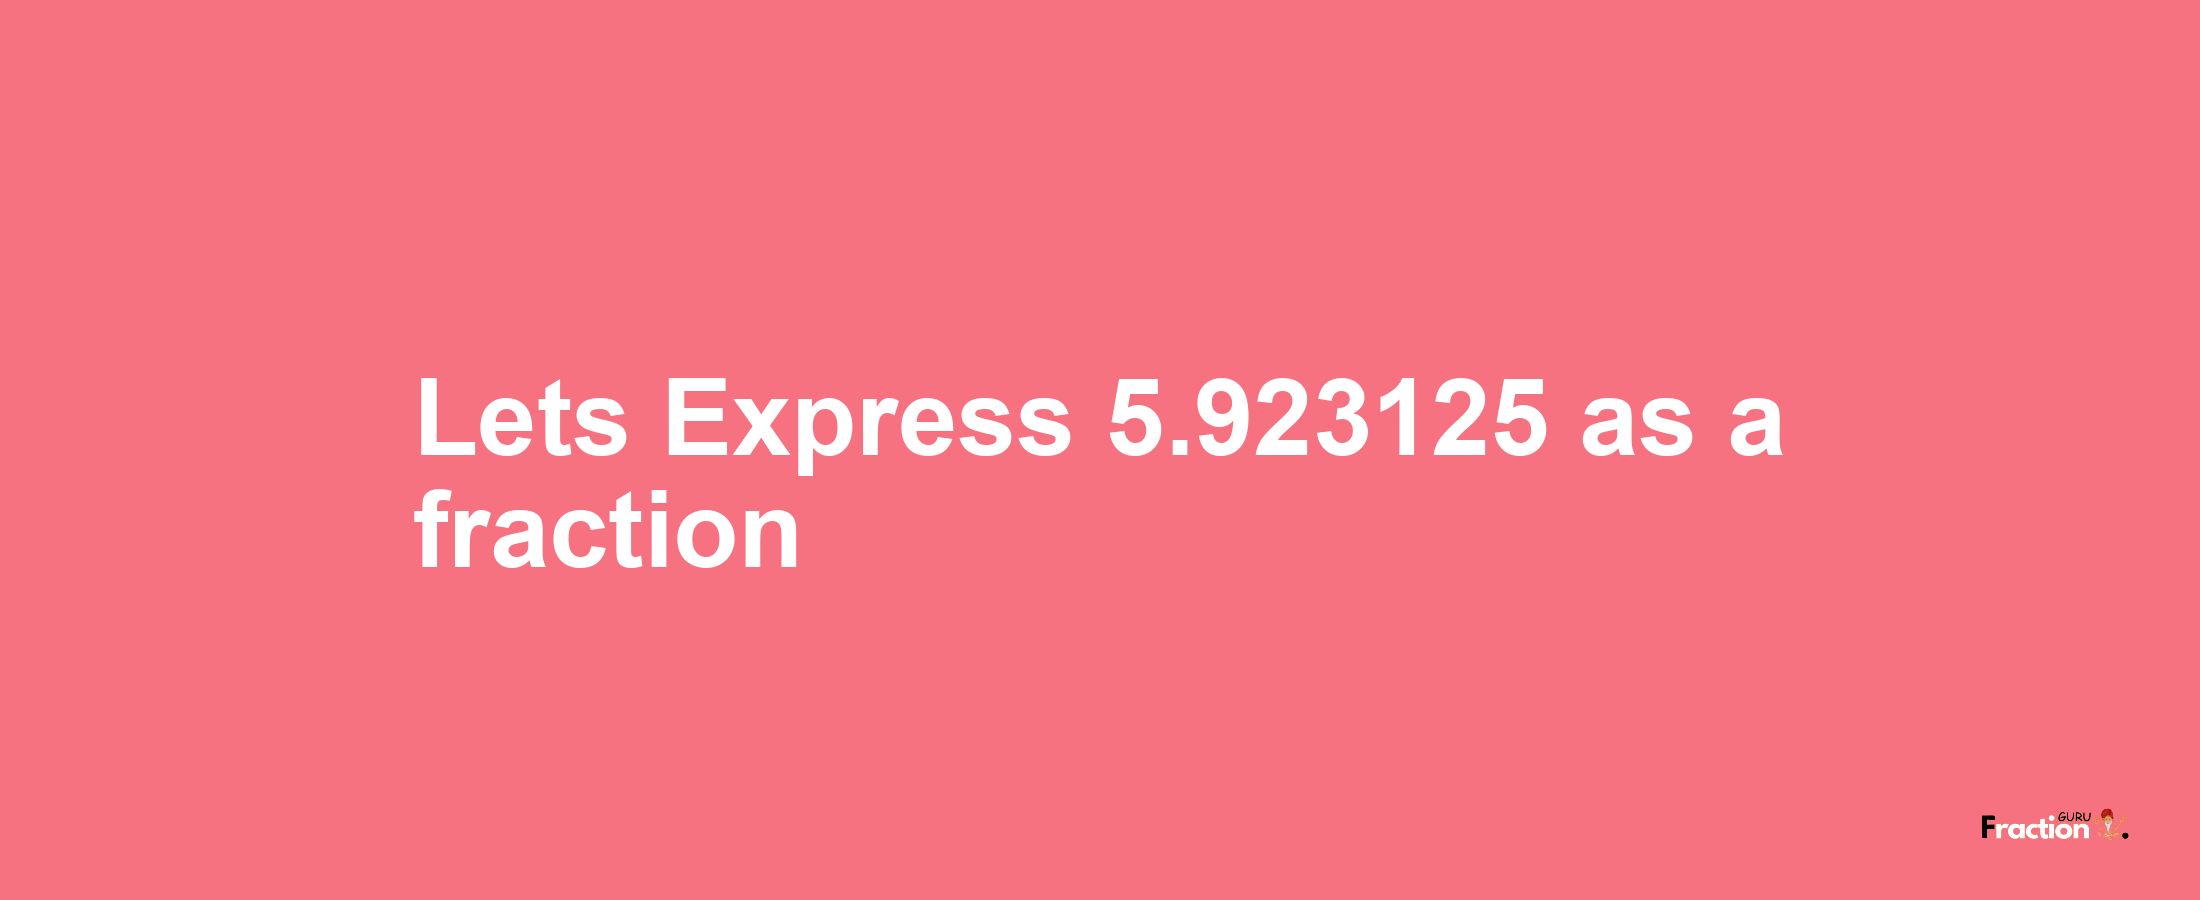 Lets Express 5.923125 as afraction